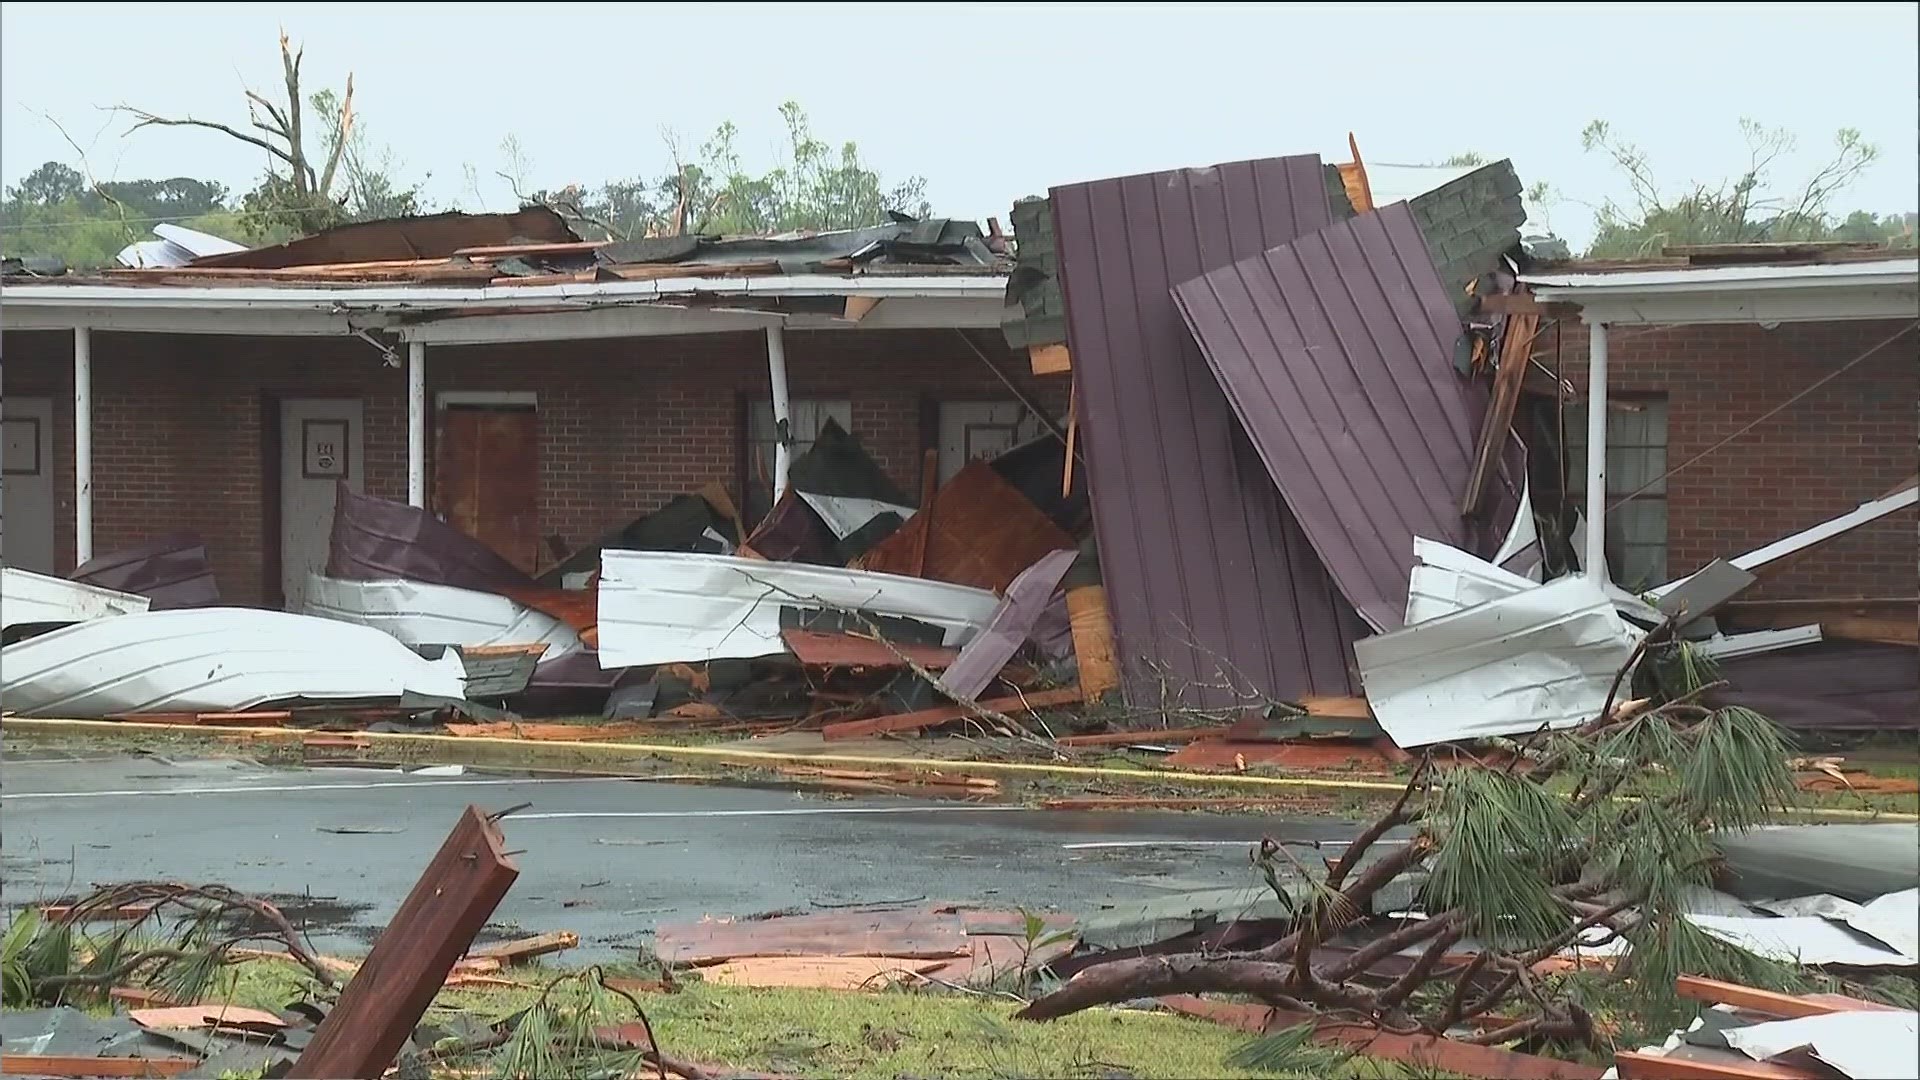 Gov. Brian Kemp will make a trip Monday to tour parts of western Georgia where severe storms and tornadoes ripped through several homes and businesses Sunday morning